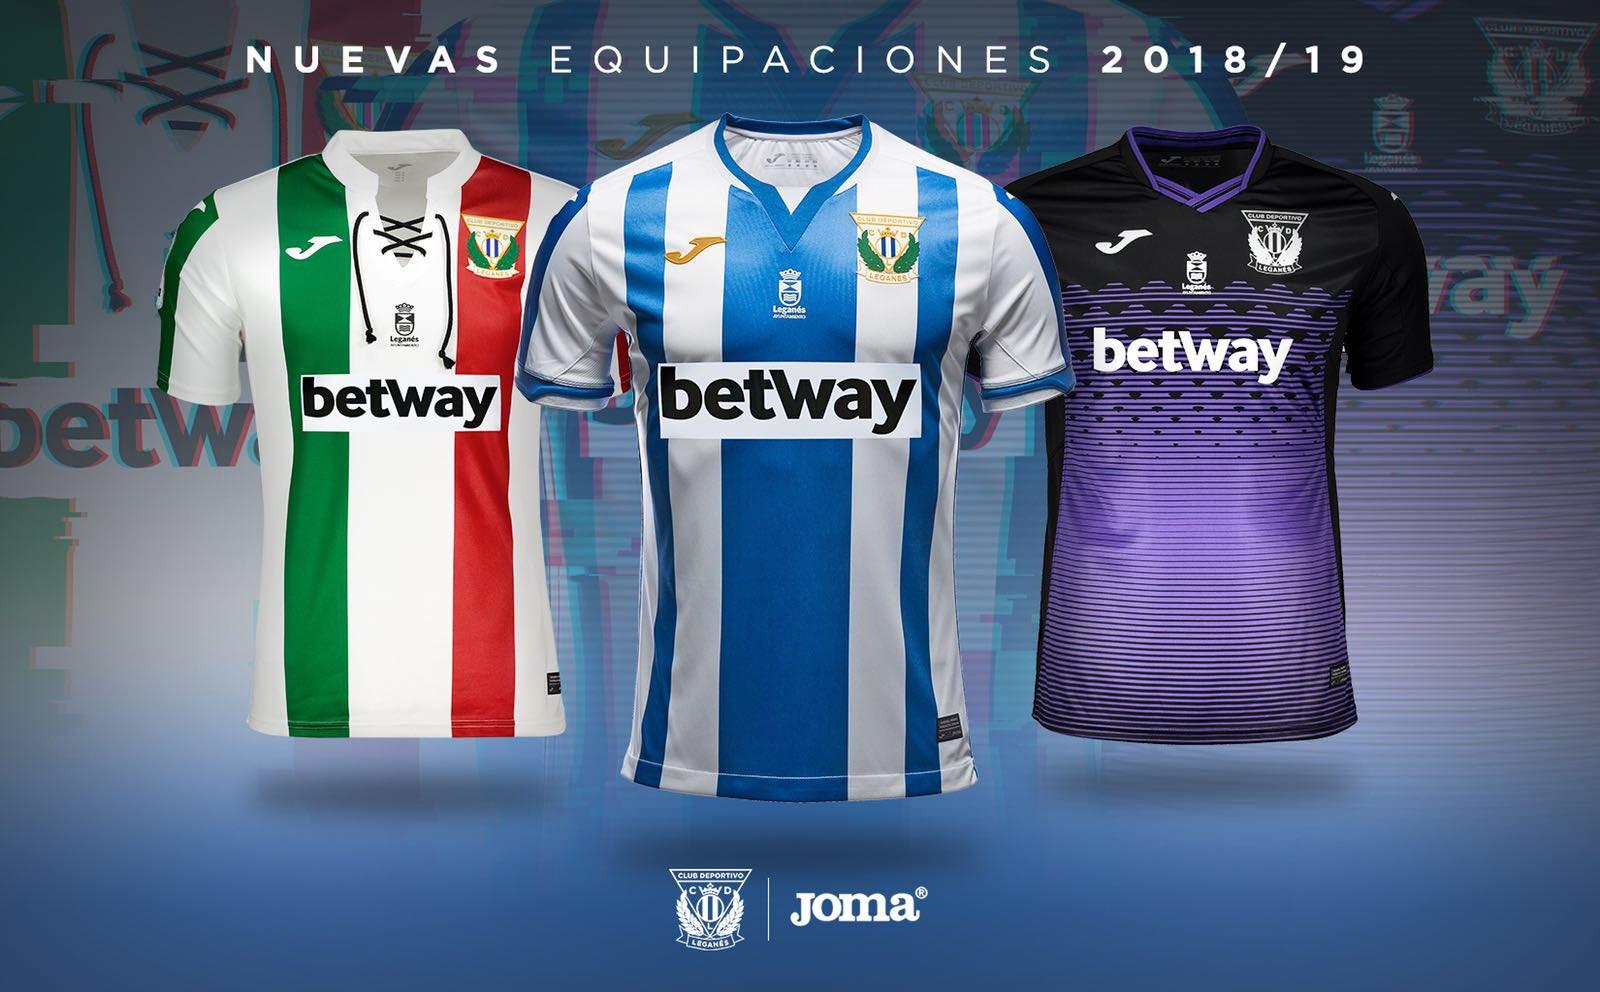 VIDEO: Joma launch of the 2018/19 season CD Leganes home kit!